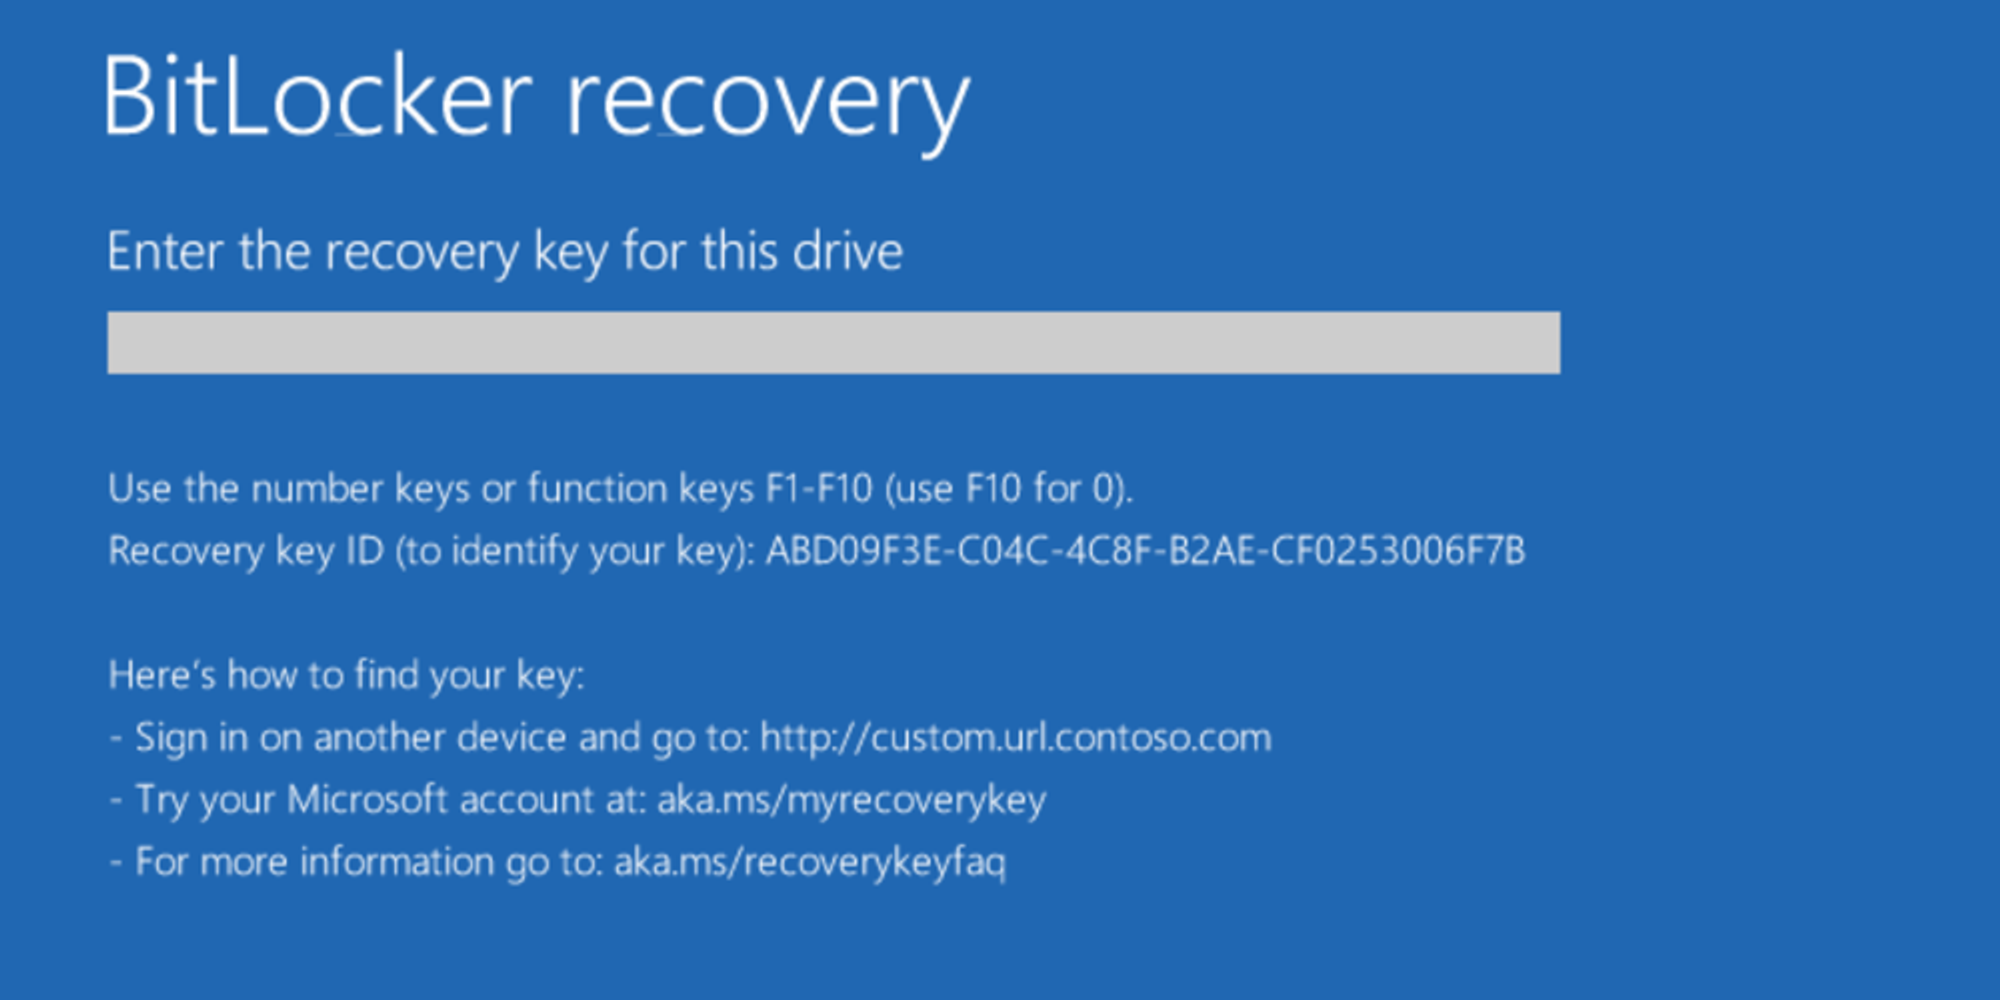 Enter recovery key